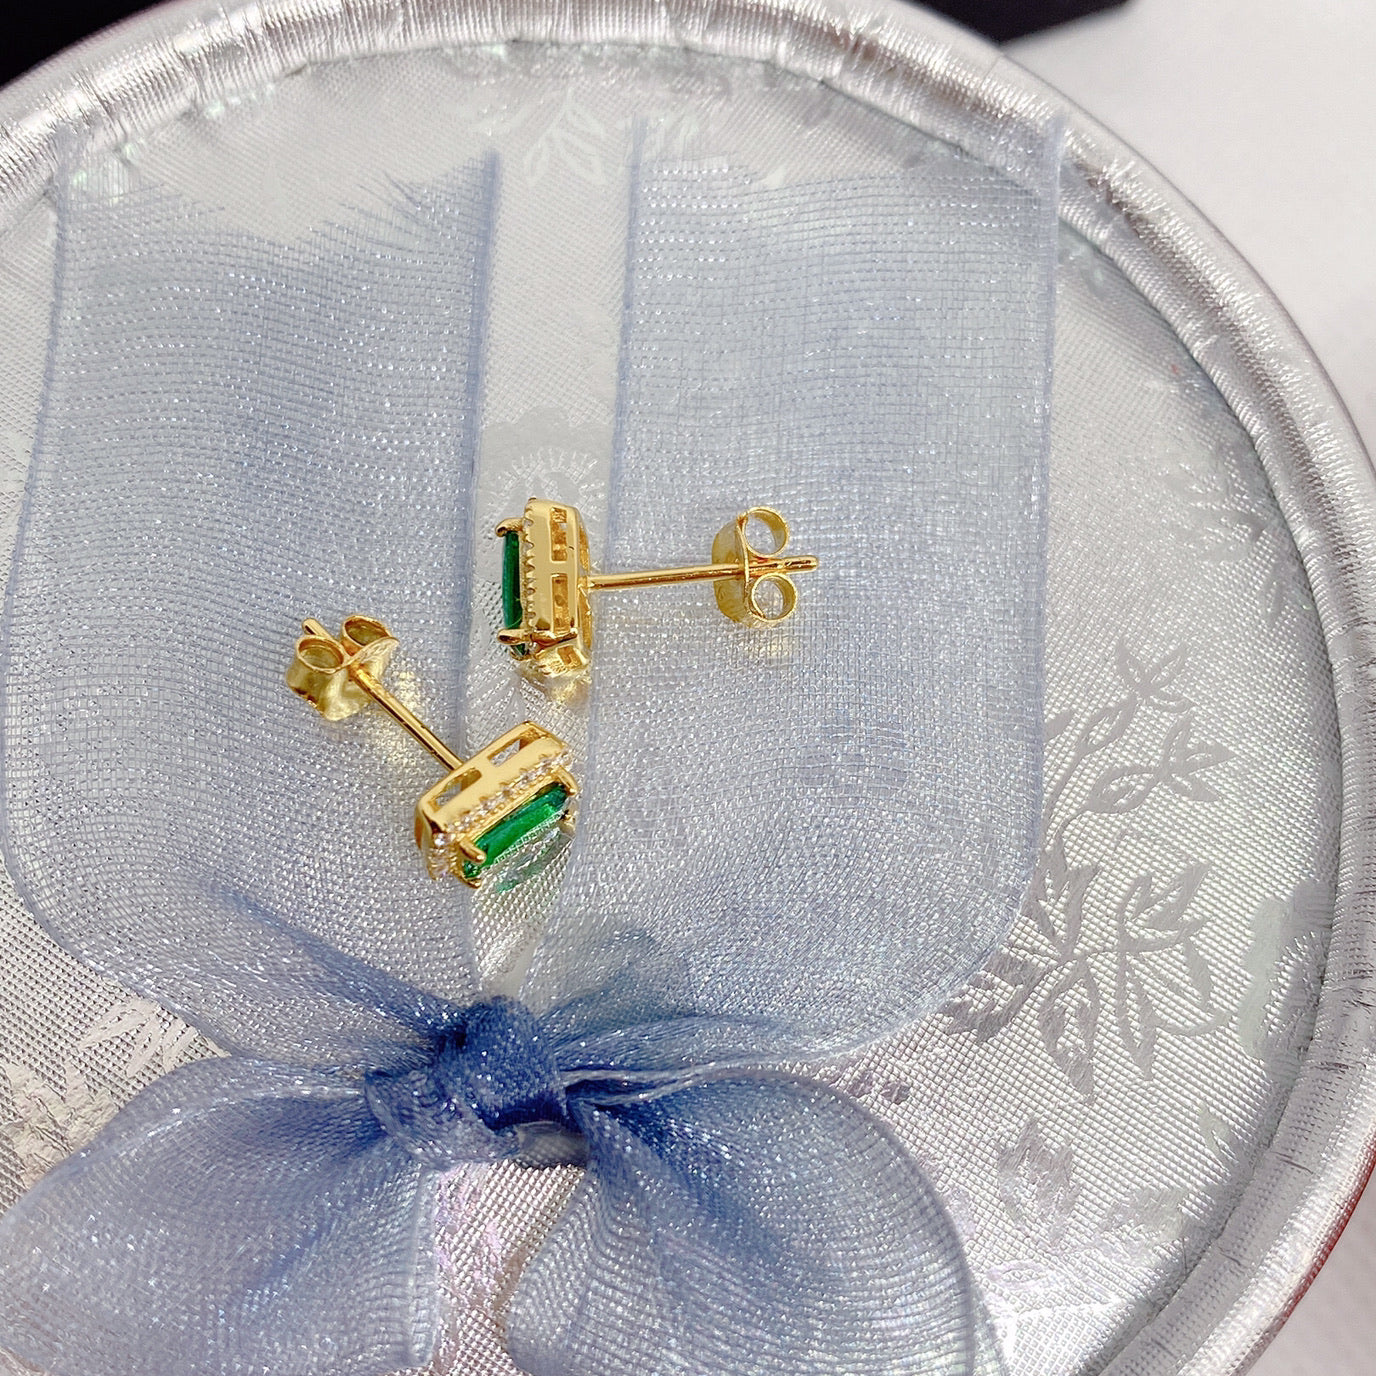 18k Gold Plated 925 Silver Earrings With Precision Cut Green Emeralds - Bieauli 